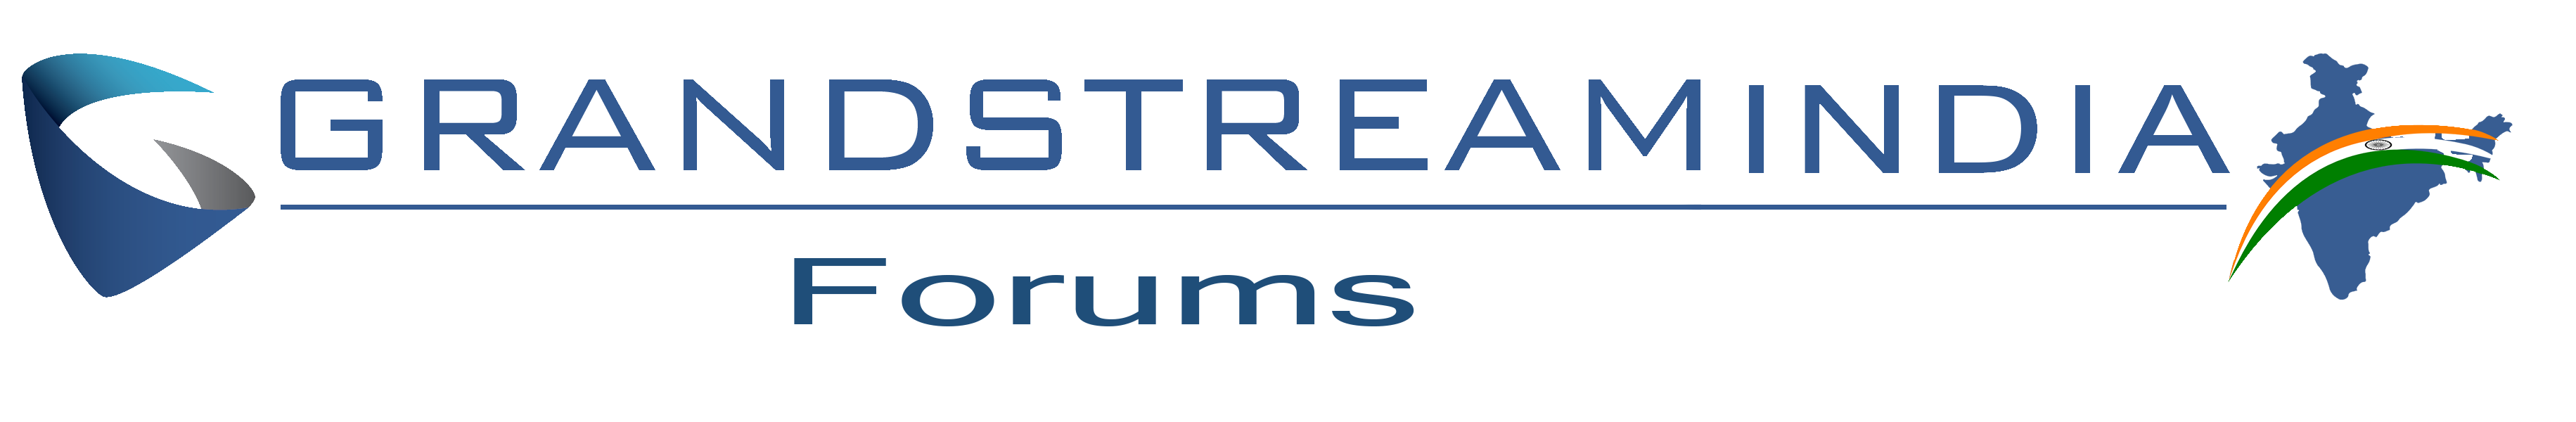 Welcome to GrandStream Forum Page